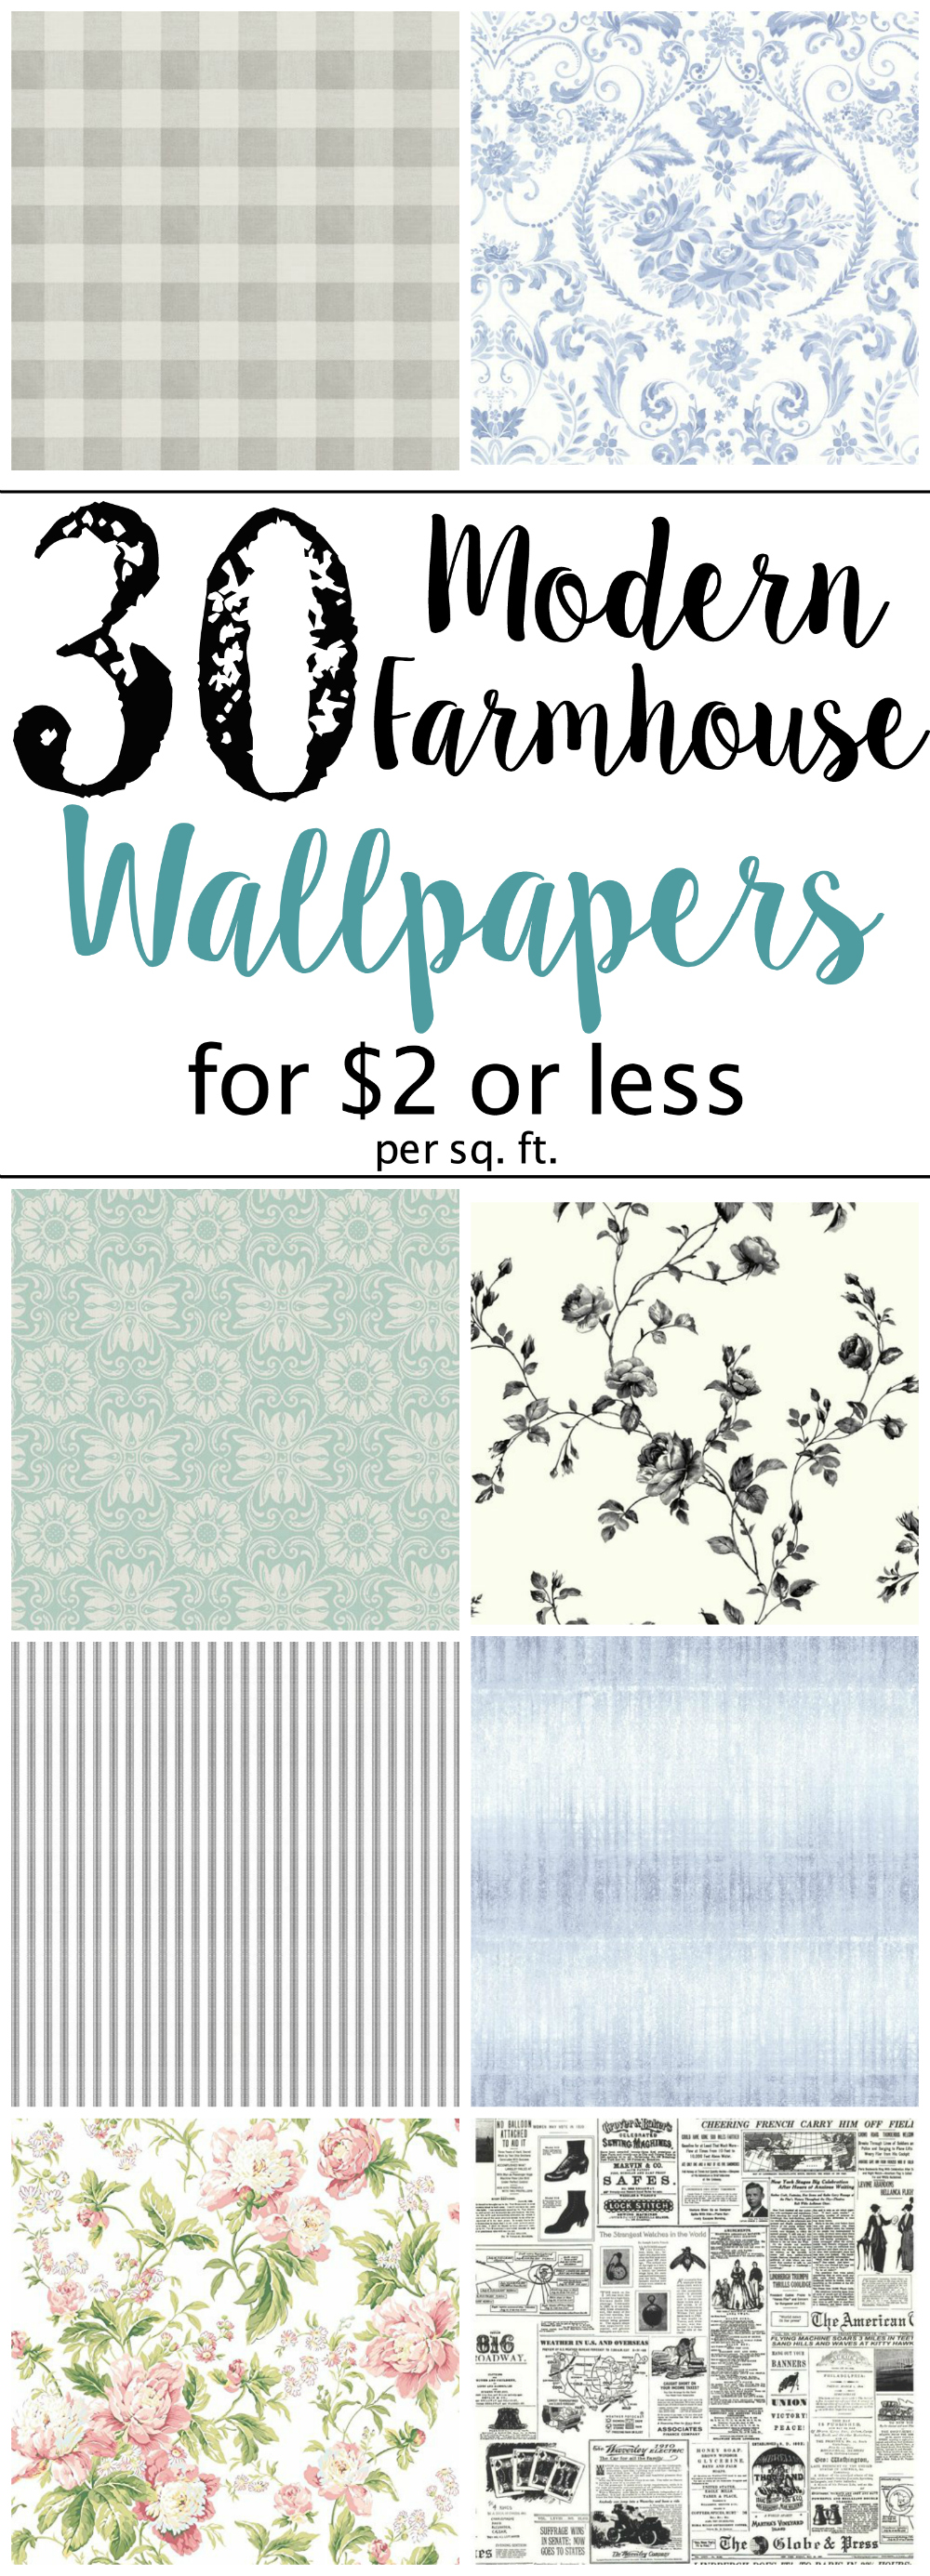 Beginners Guide to Hanging Wallpaper   Blesser House